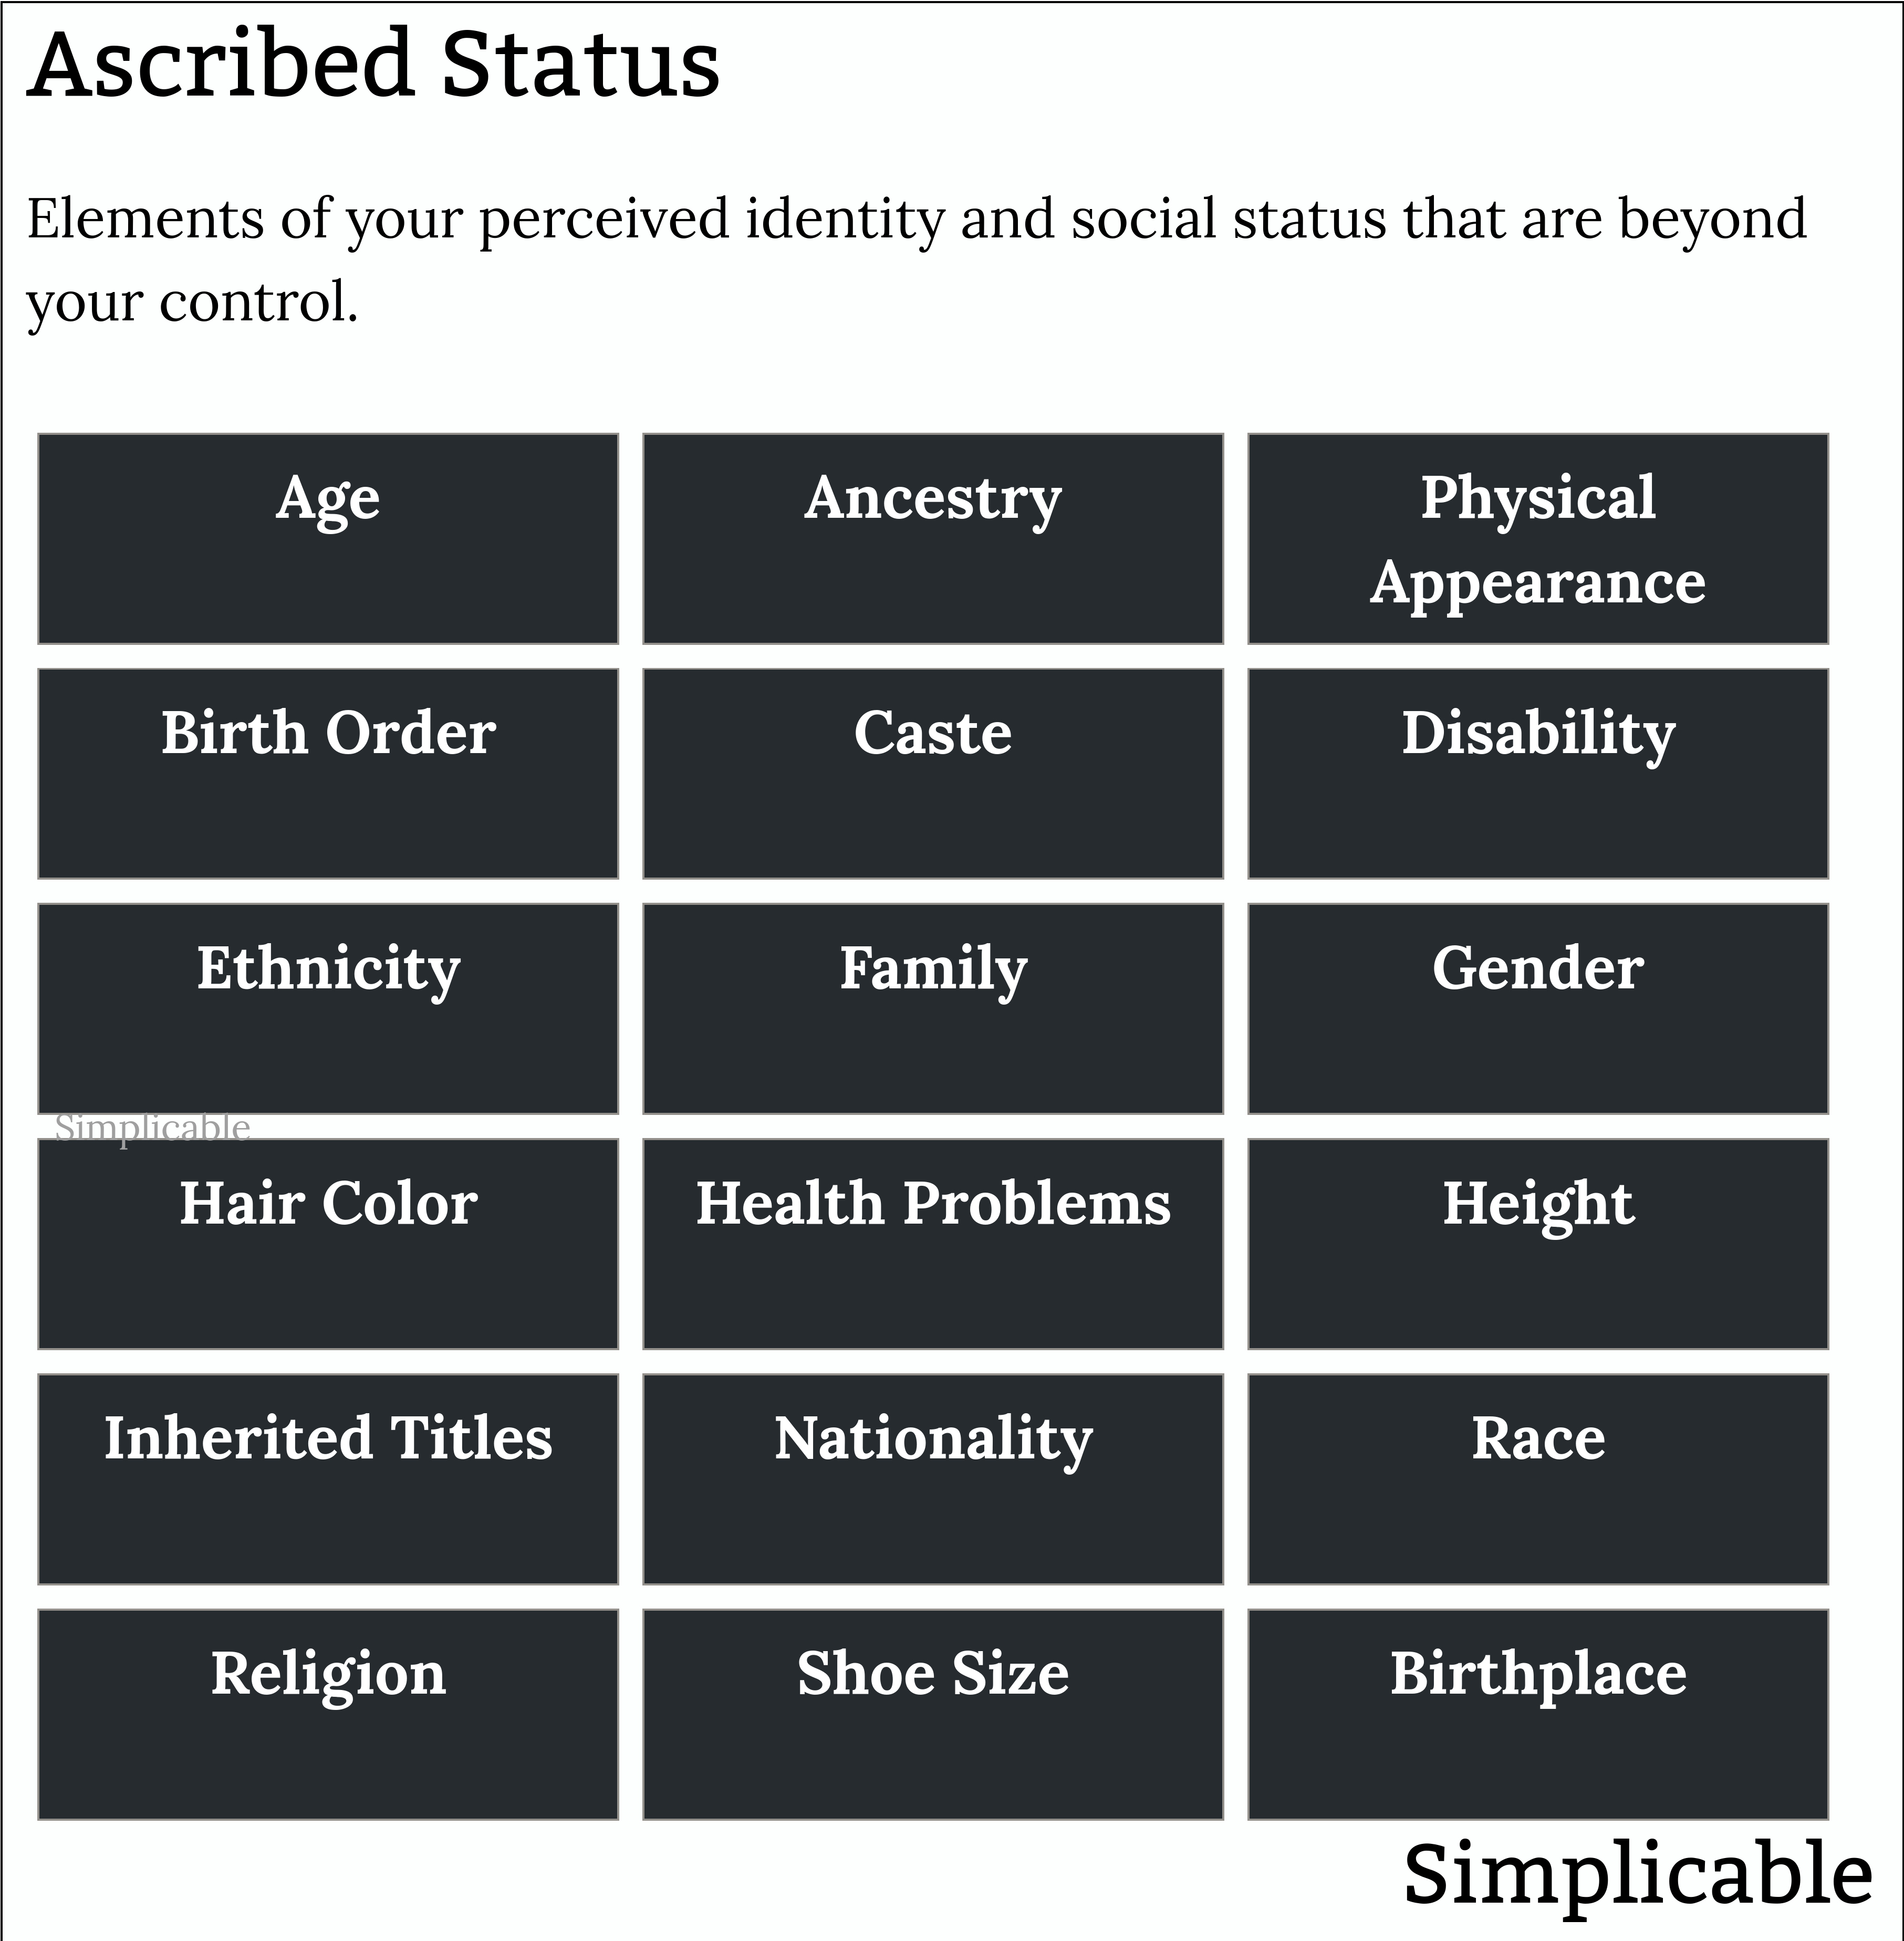 examples of ascribed status